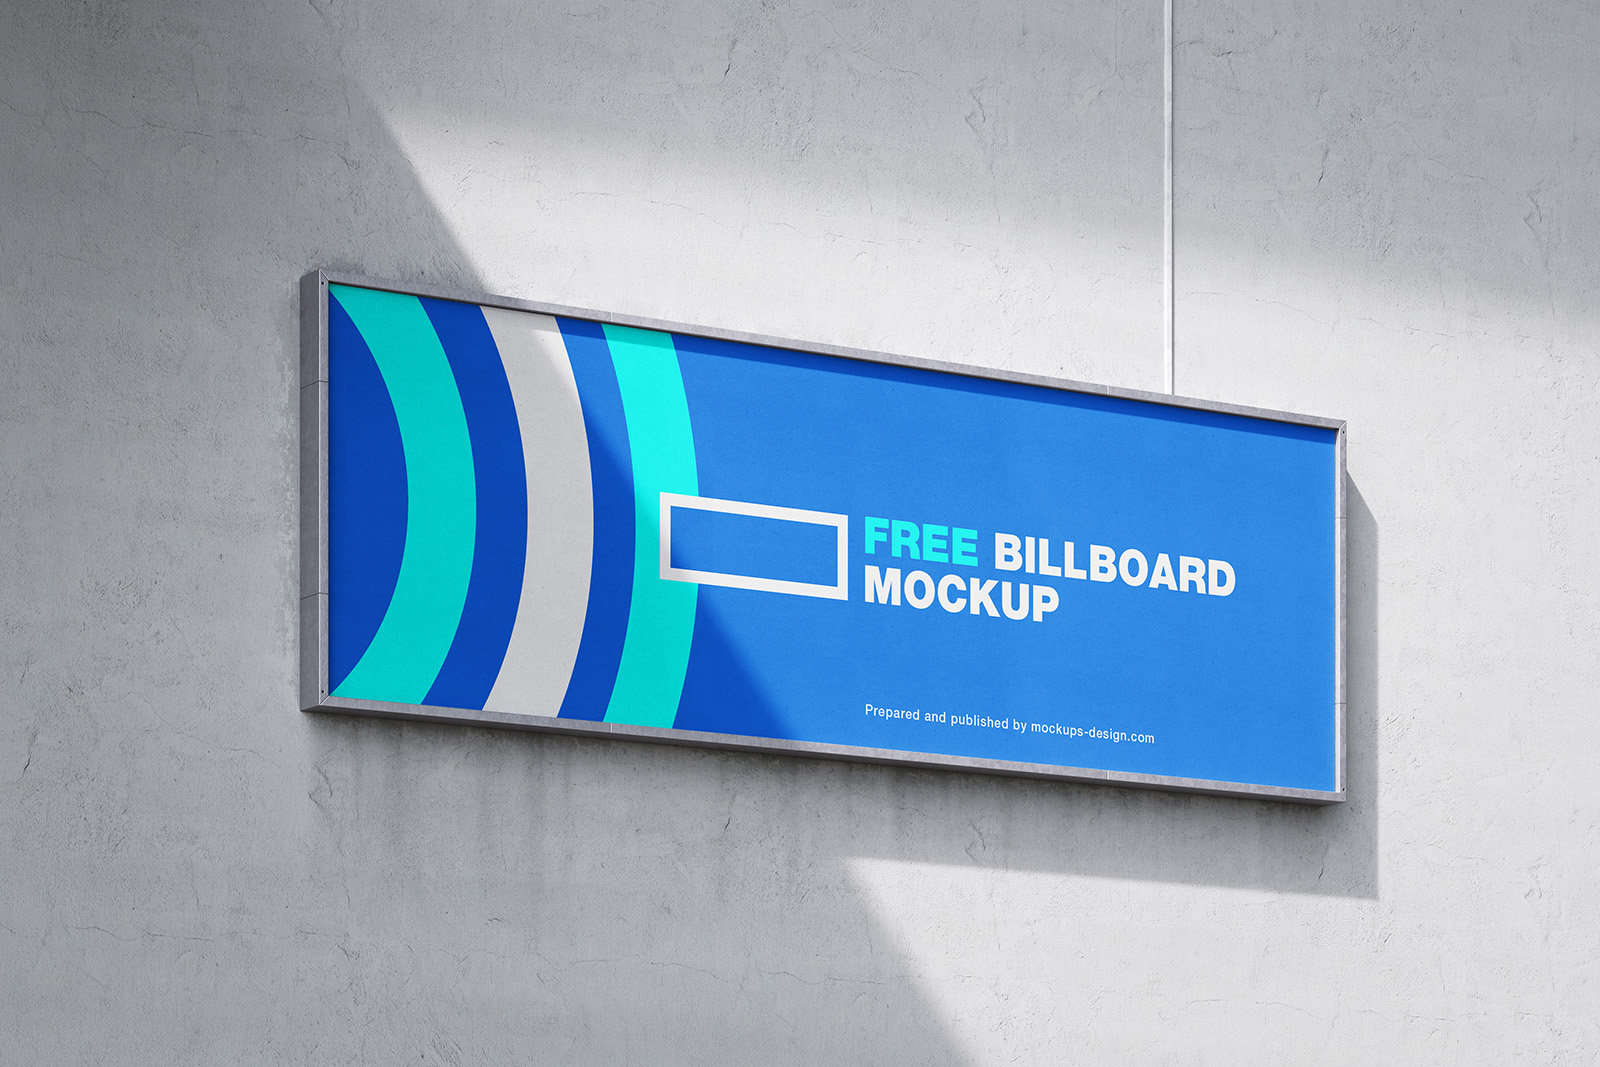 3 Mockups of Billboards on Cement Walls FREE PSD